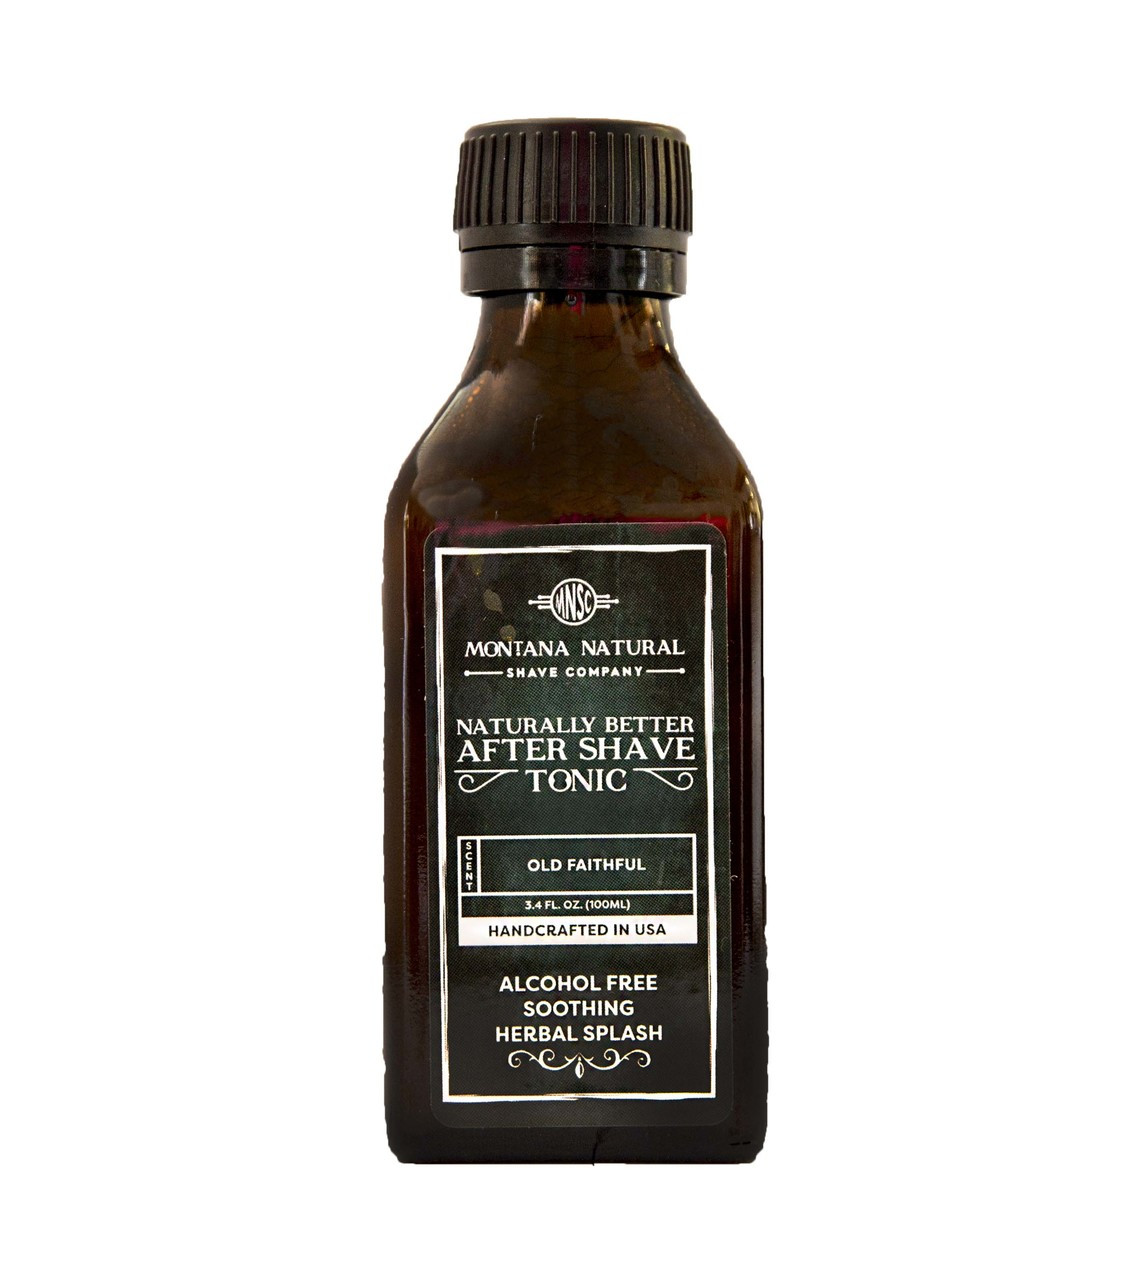 Old Faithful Old School Aftershave Tonic. Naturally Better  Alcohol Free Botanical Splash. Montana Natural Shave Company